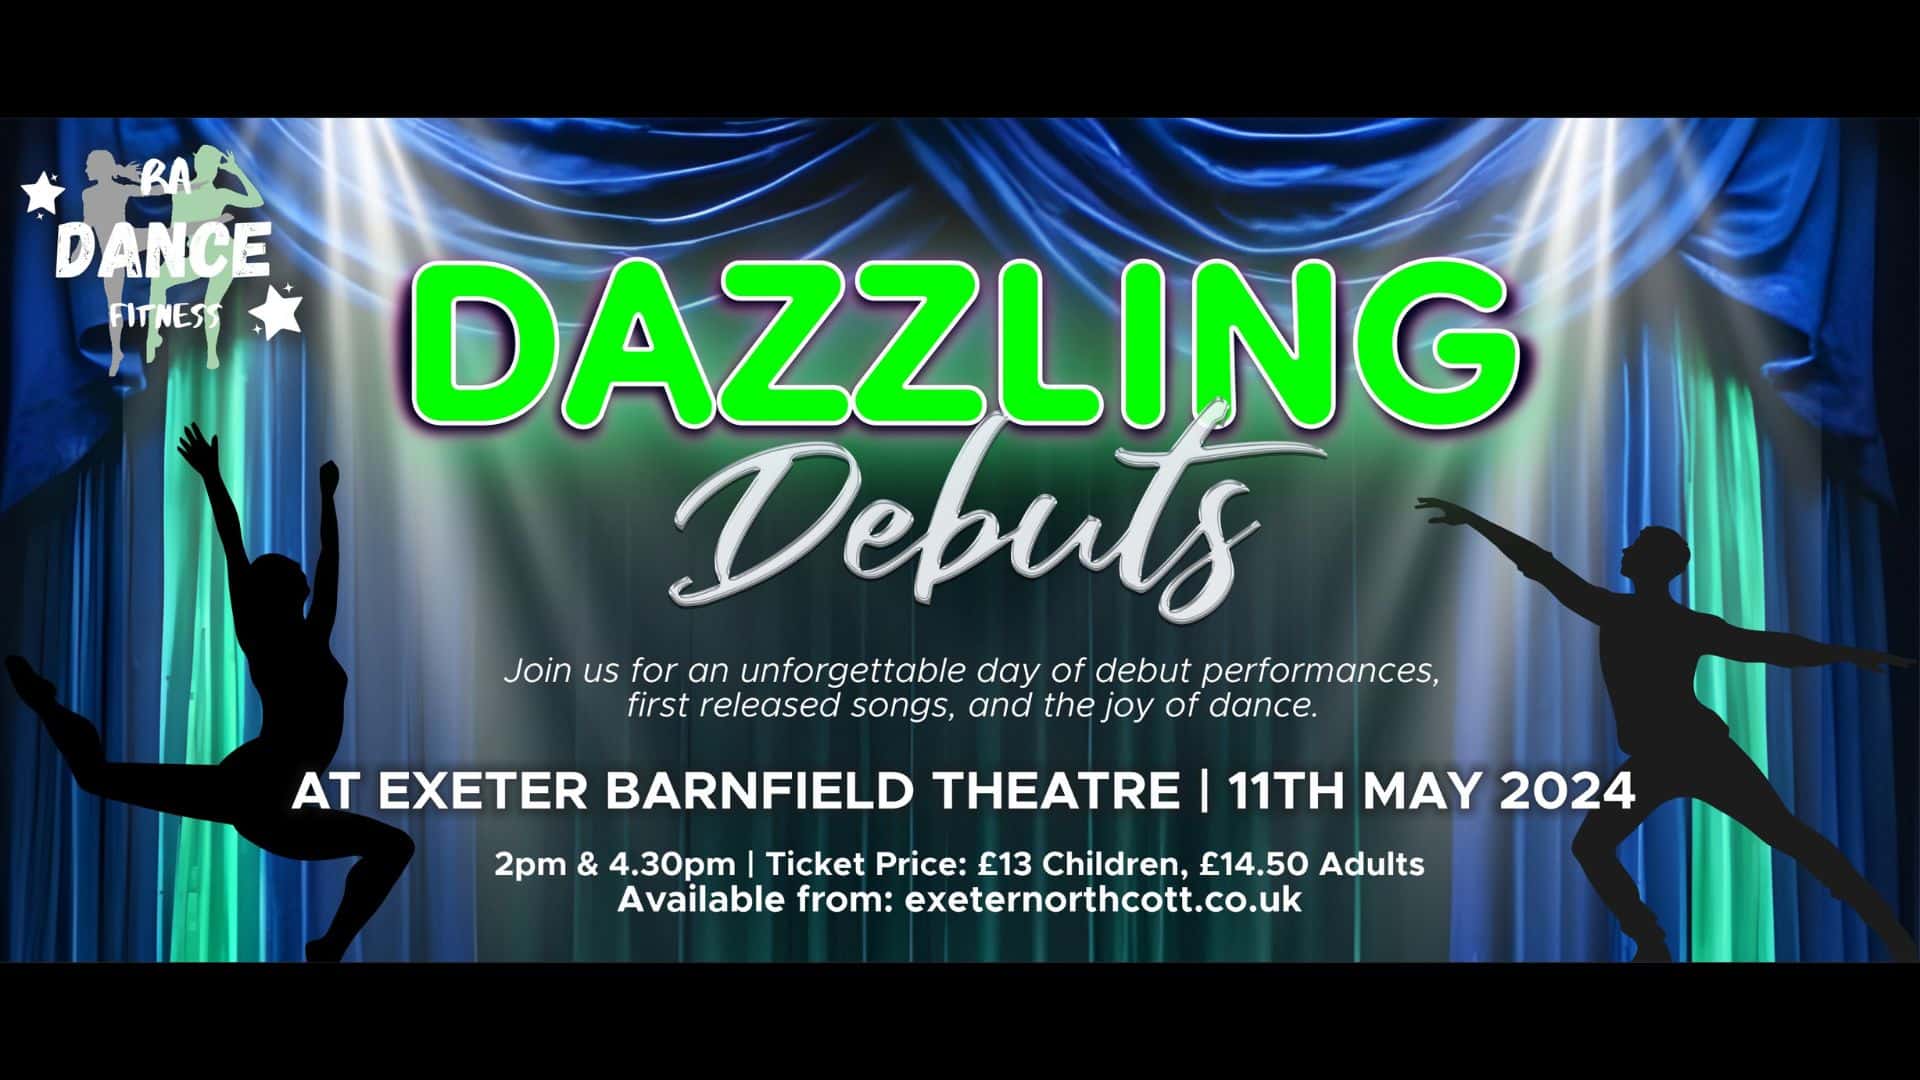 Dazzling debuts promo artwork. A blue theatre curtain background. Two silhouetted dancers in action. Neon green bubble text reads: 'Dazzling Debuts'.